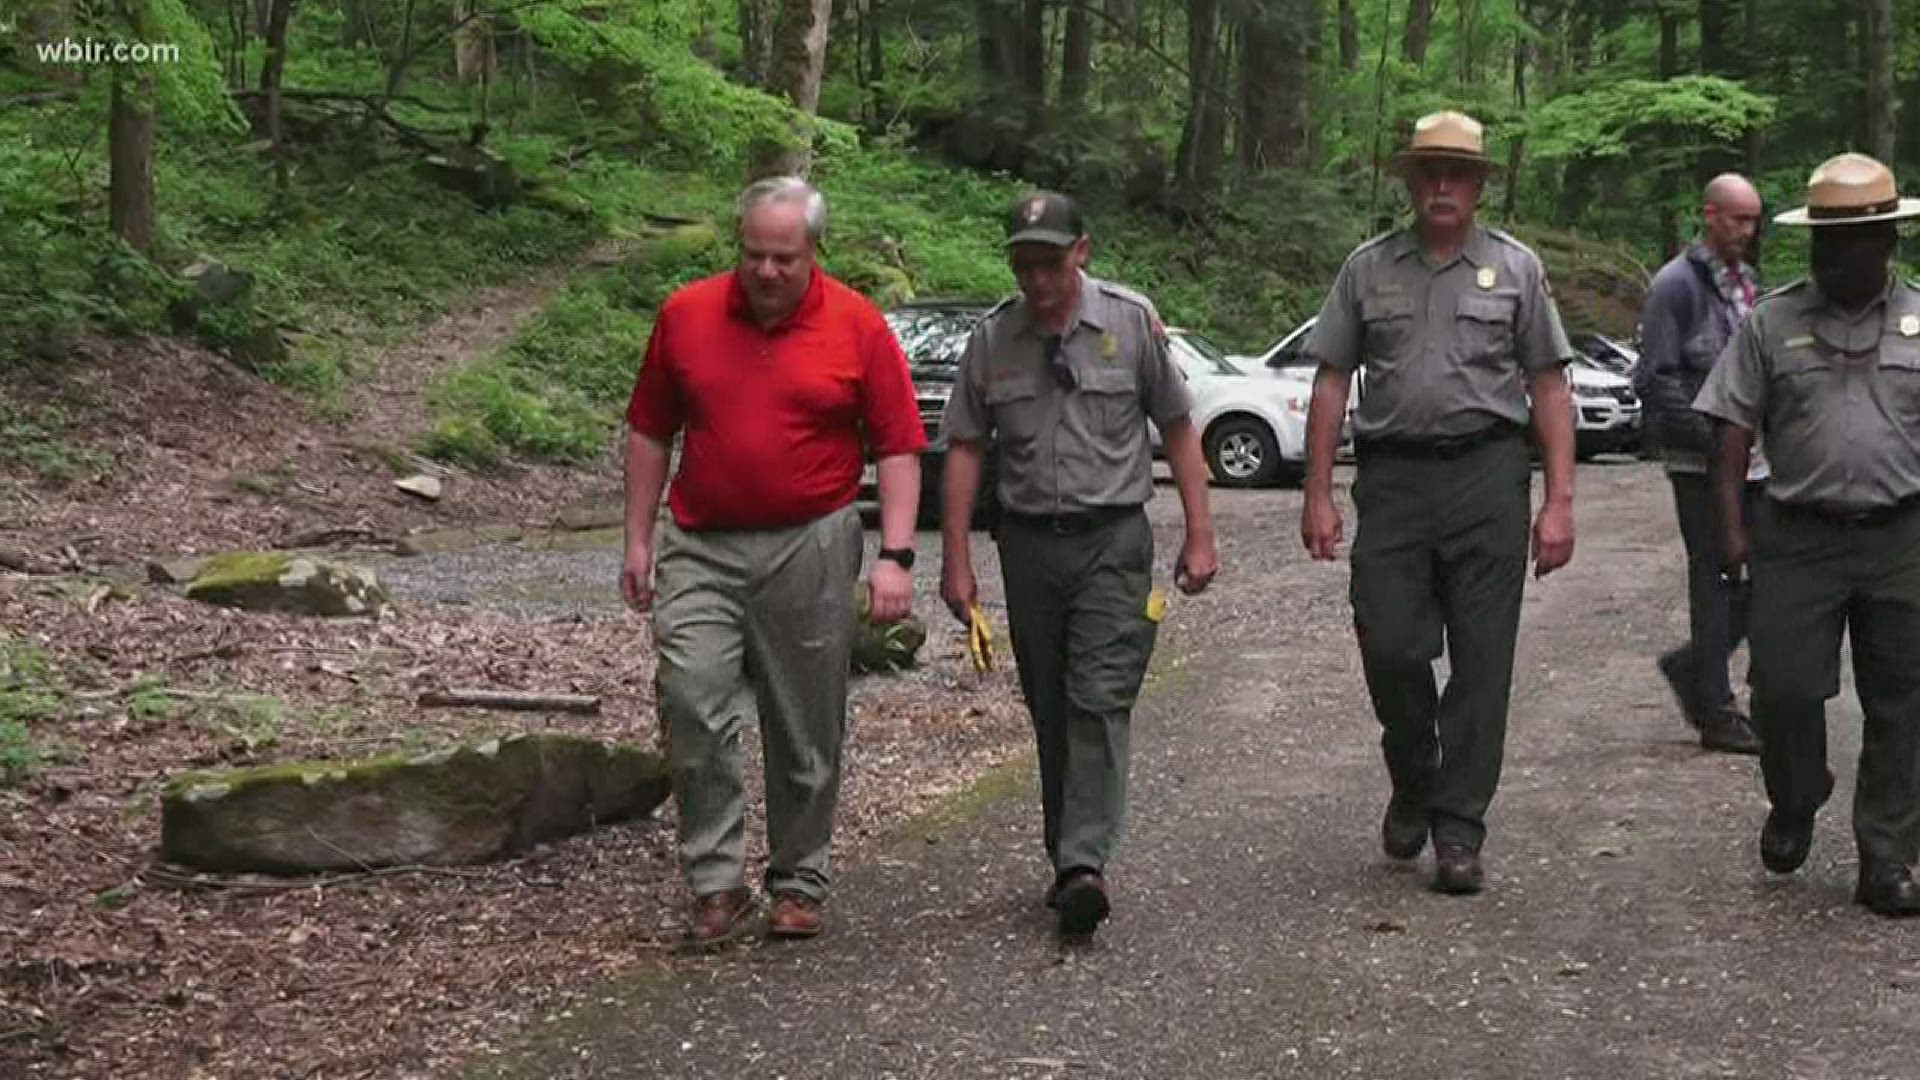 The U.S. Secretary of the Interior paid a visit Tuesday afternoon to the Smokies as it's set to reopen to the public this weekend.